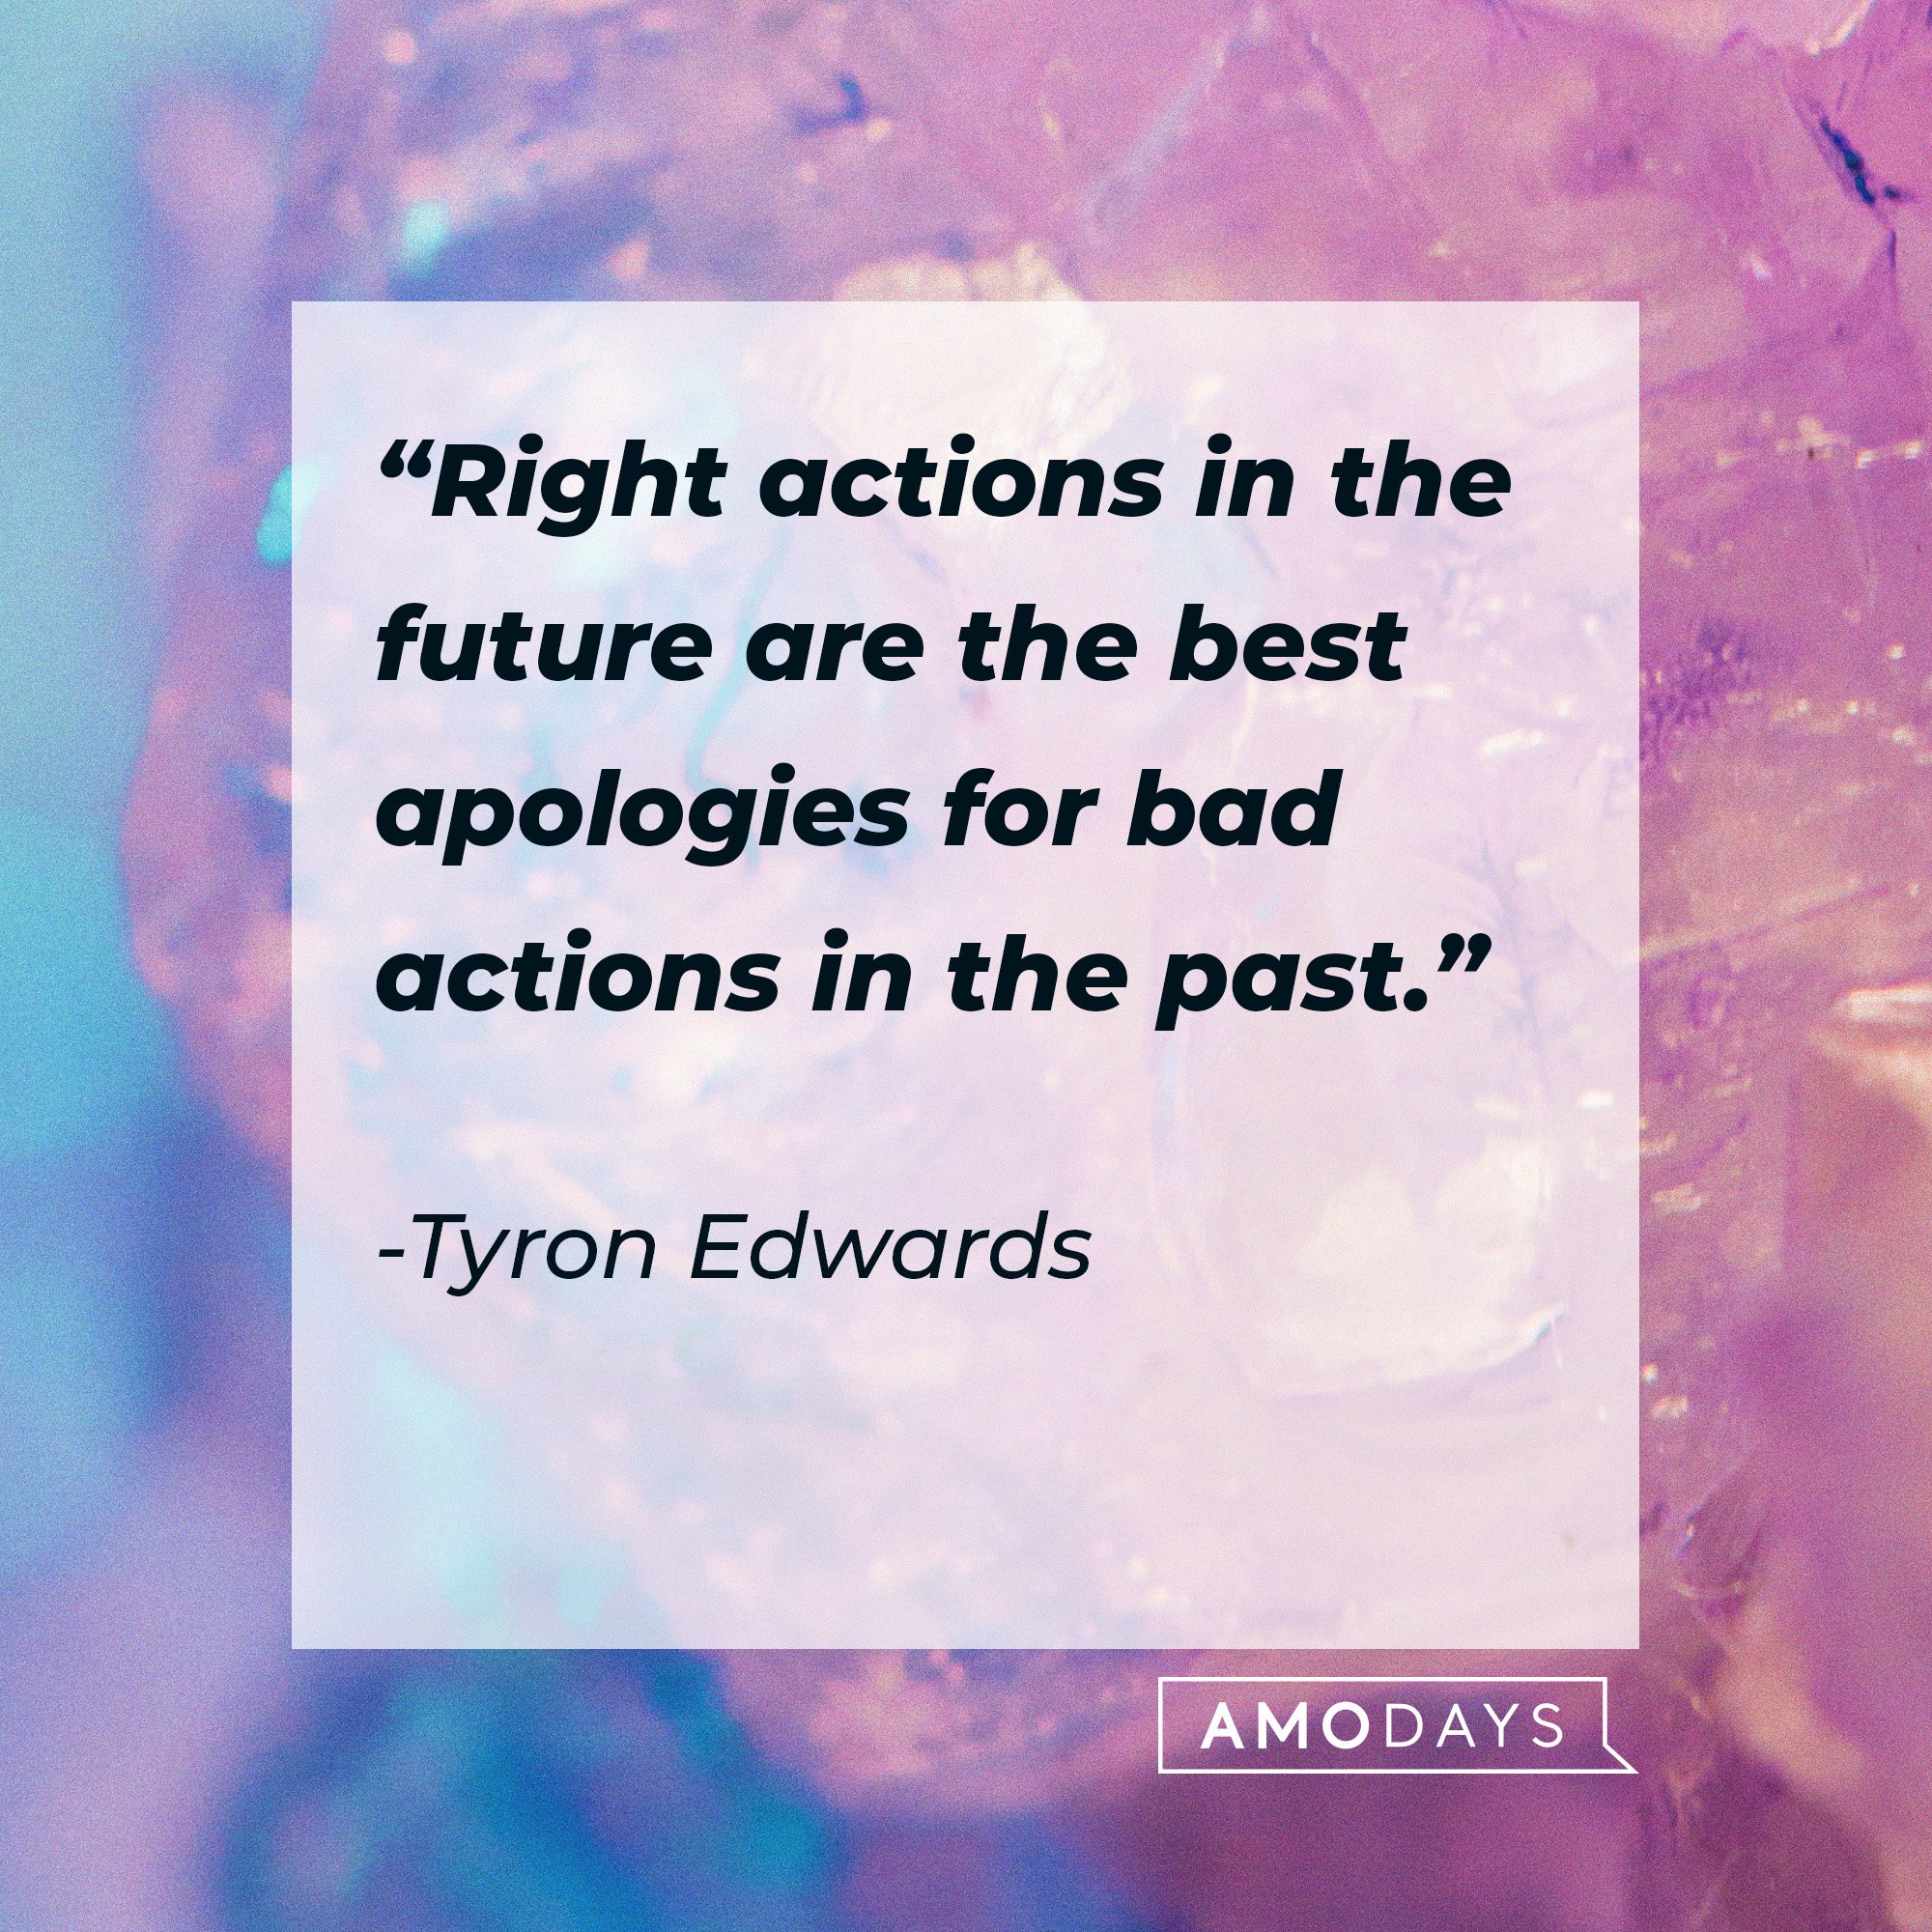 “Your right actions might hurt someone, so if required apologize for your right actions, but don’t stop taking right actions.“ | Image: AmoDays